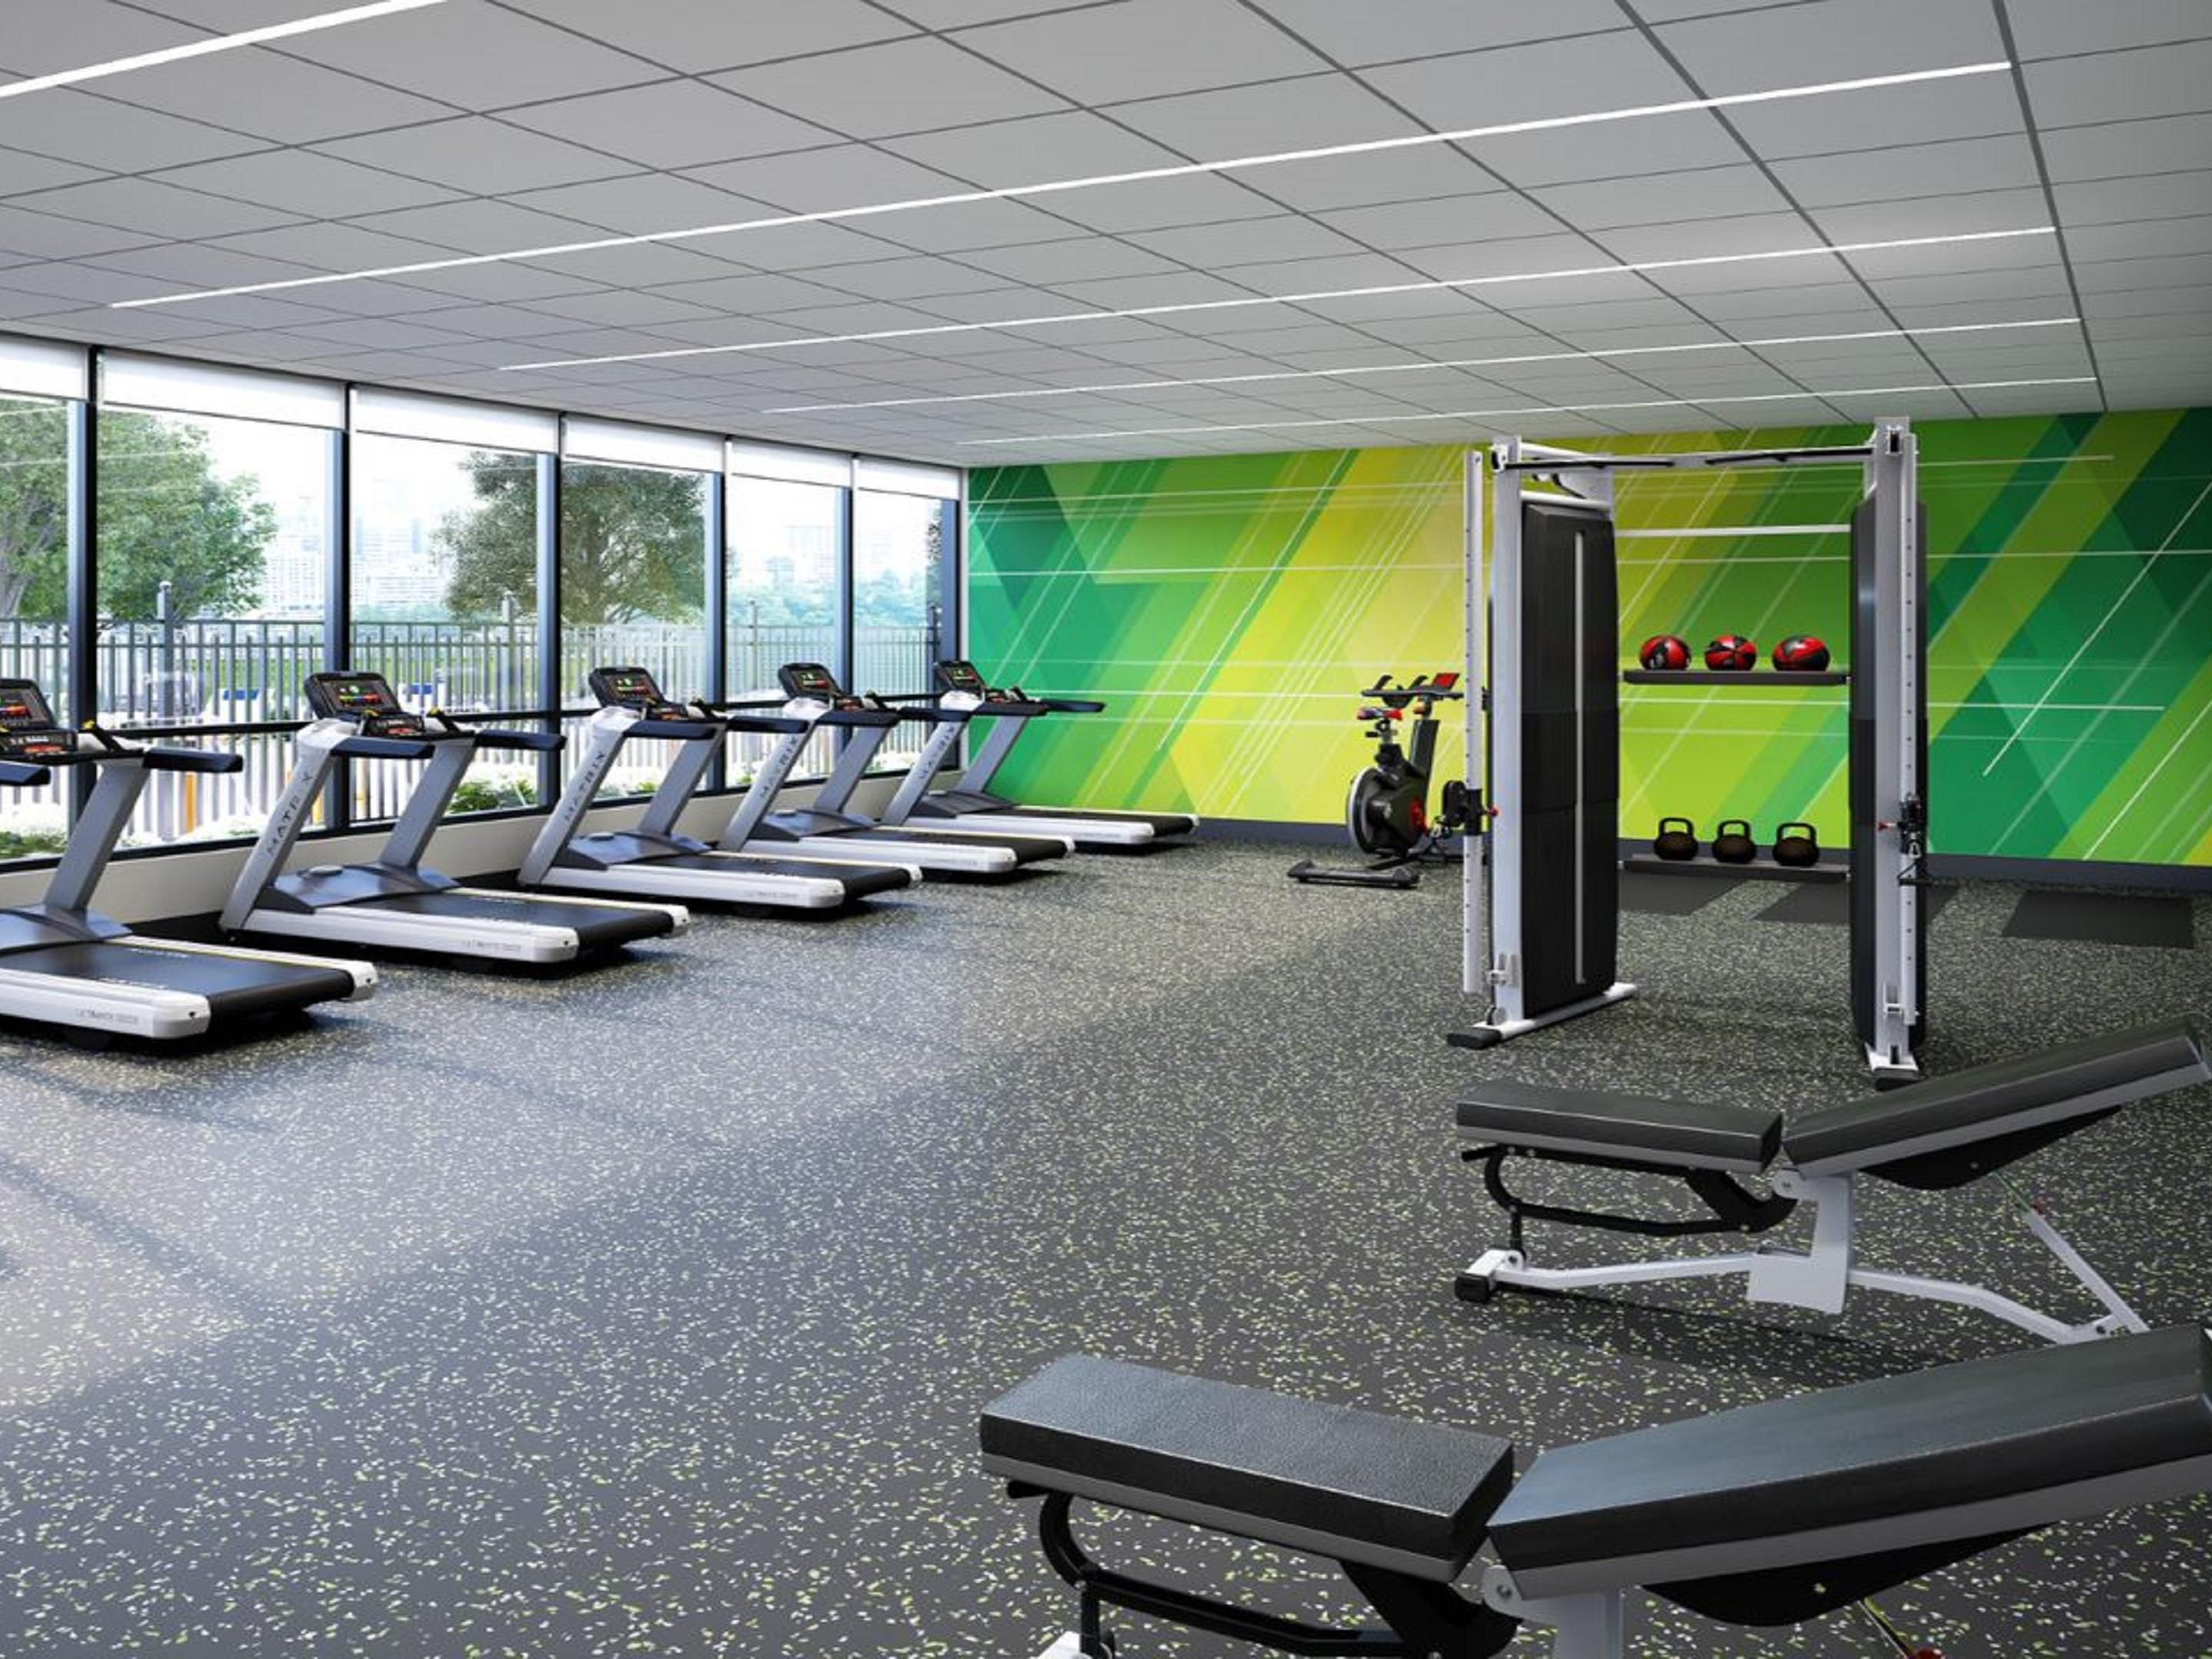 Get your sweat on in our complimentary, fully equipped Fitness Centre - open 5AM to 11PM.